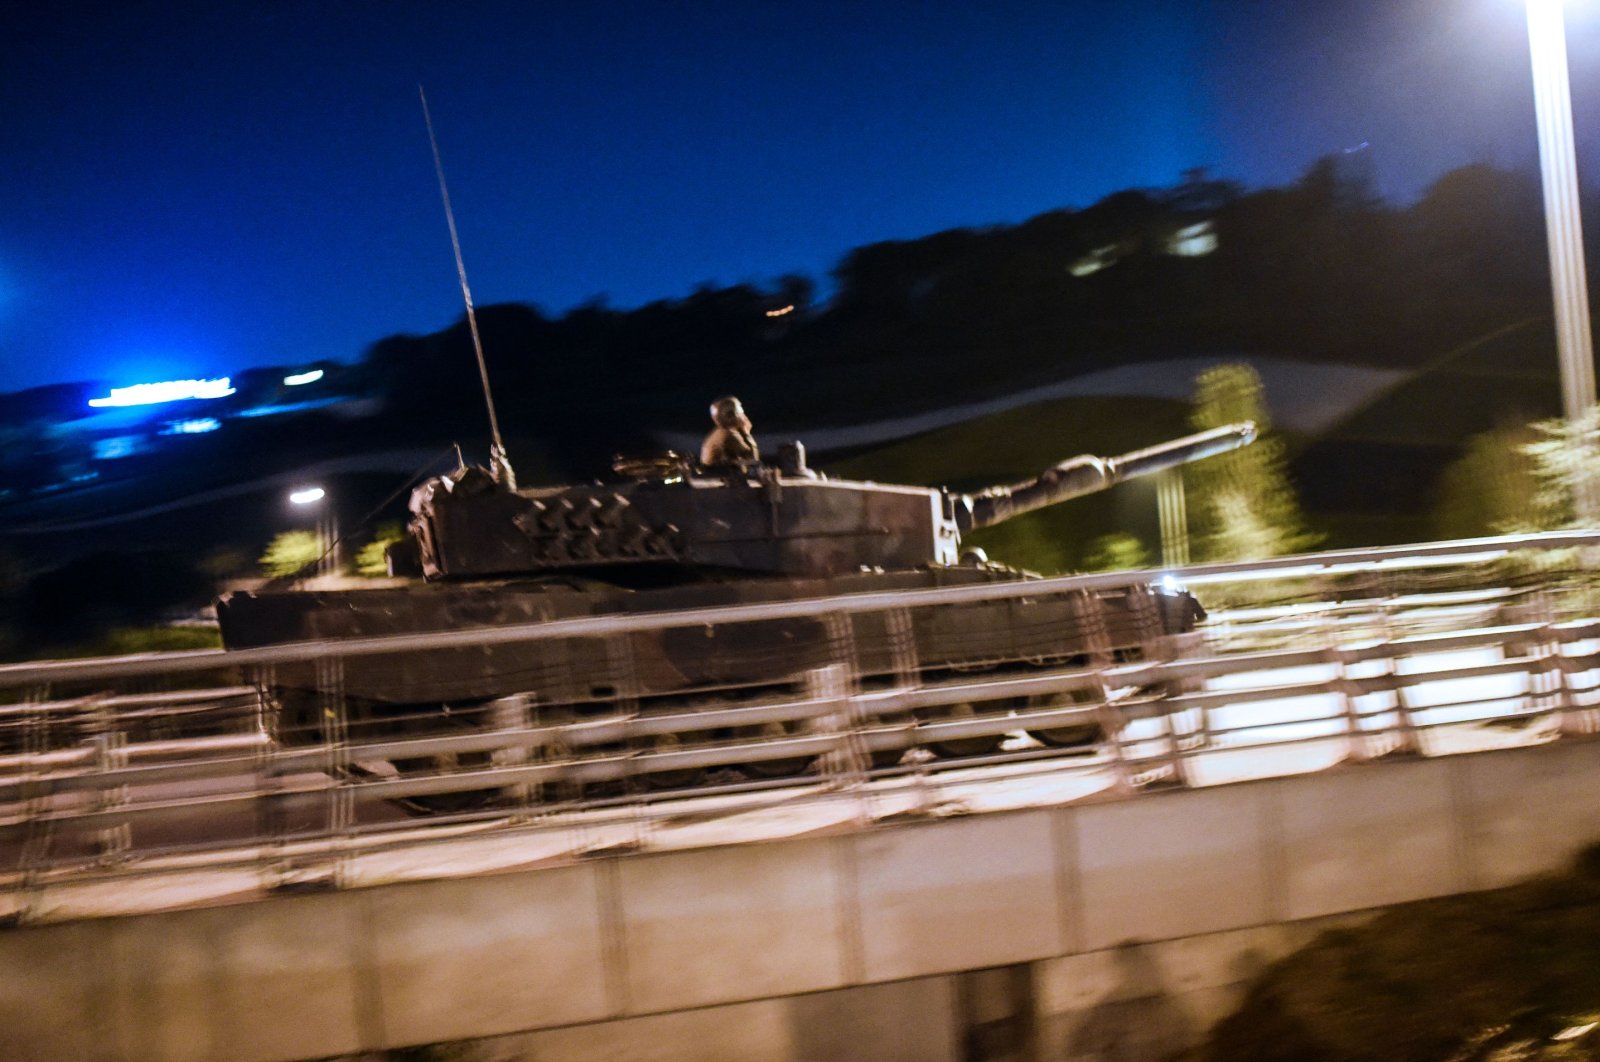 A tank drives past during a coup attempt by the Gülenist Terror Group (FETÖ) at the entrance of the Bosporus Bridge, later renamed July 15 Martyrs’ Bridge, Istanbul, Turkey, July 16, 2016. (AFP Photo)